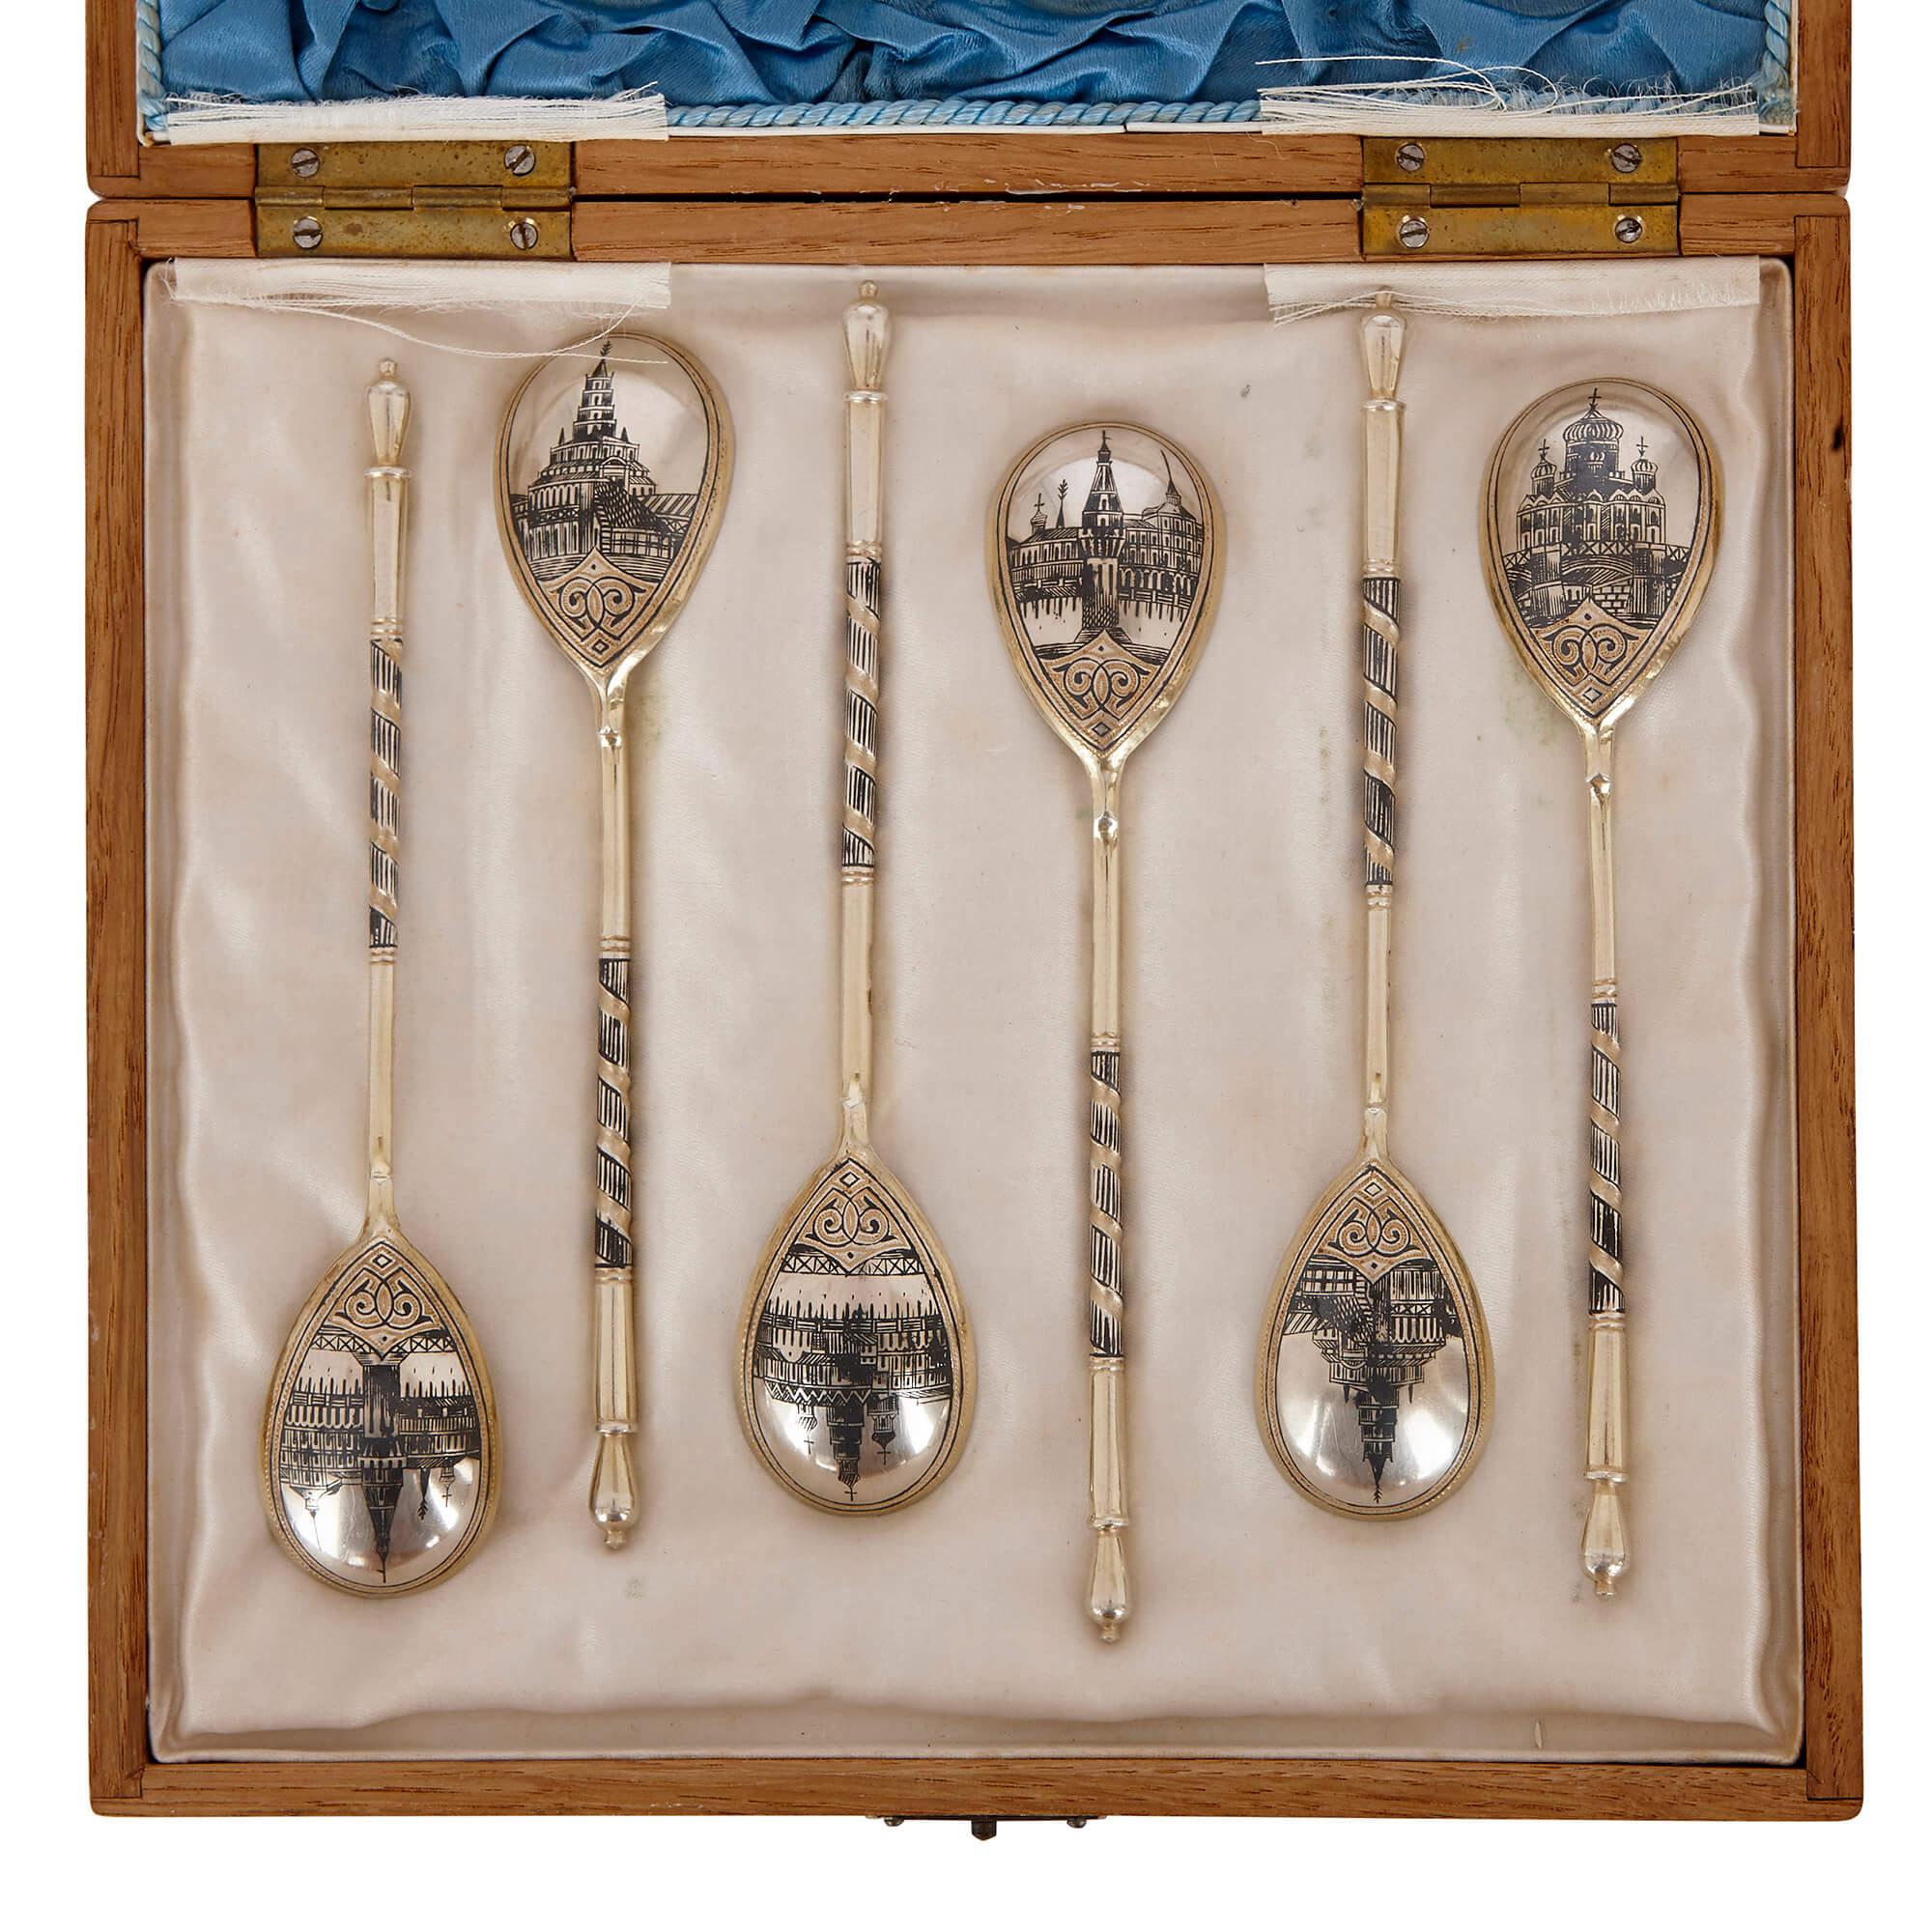 This Fine set of six silver-gilt spoons is distinctive for the intricate niello designs that decorate the back of each bowl. 

The back of each spoon bowl has been engraved with the image of a Russian building. These incised lines have been filled